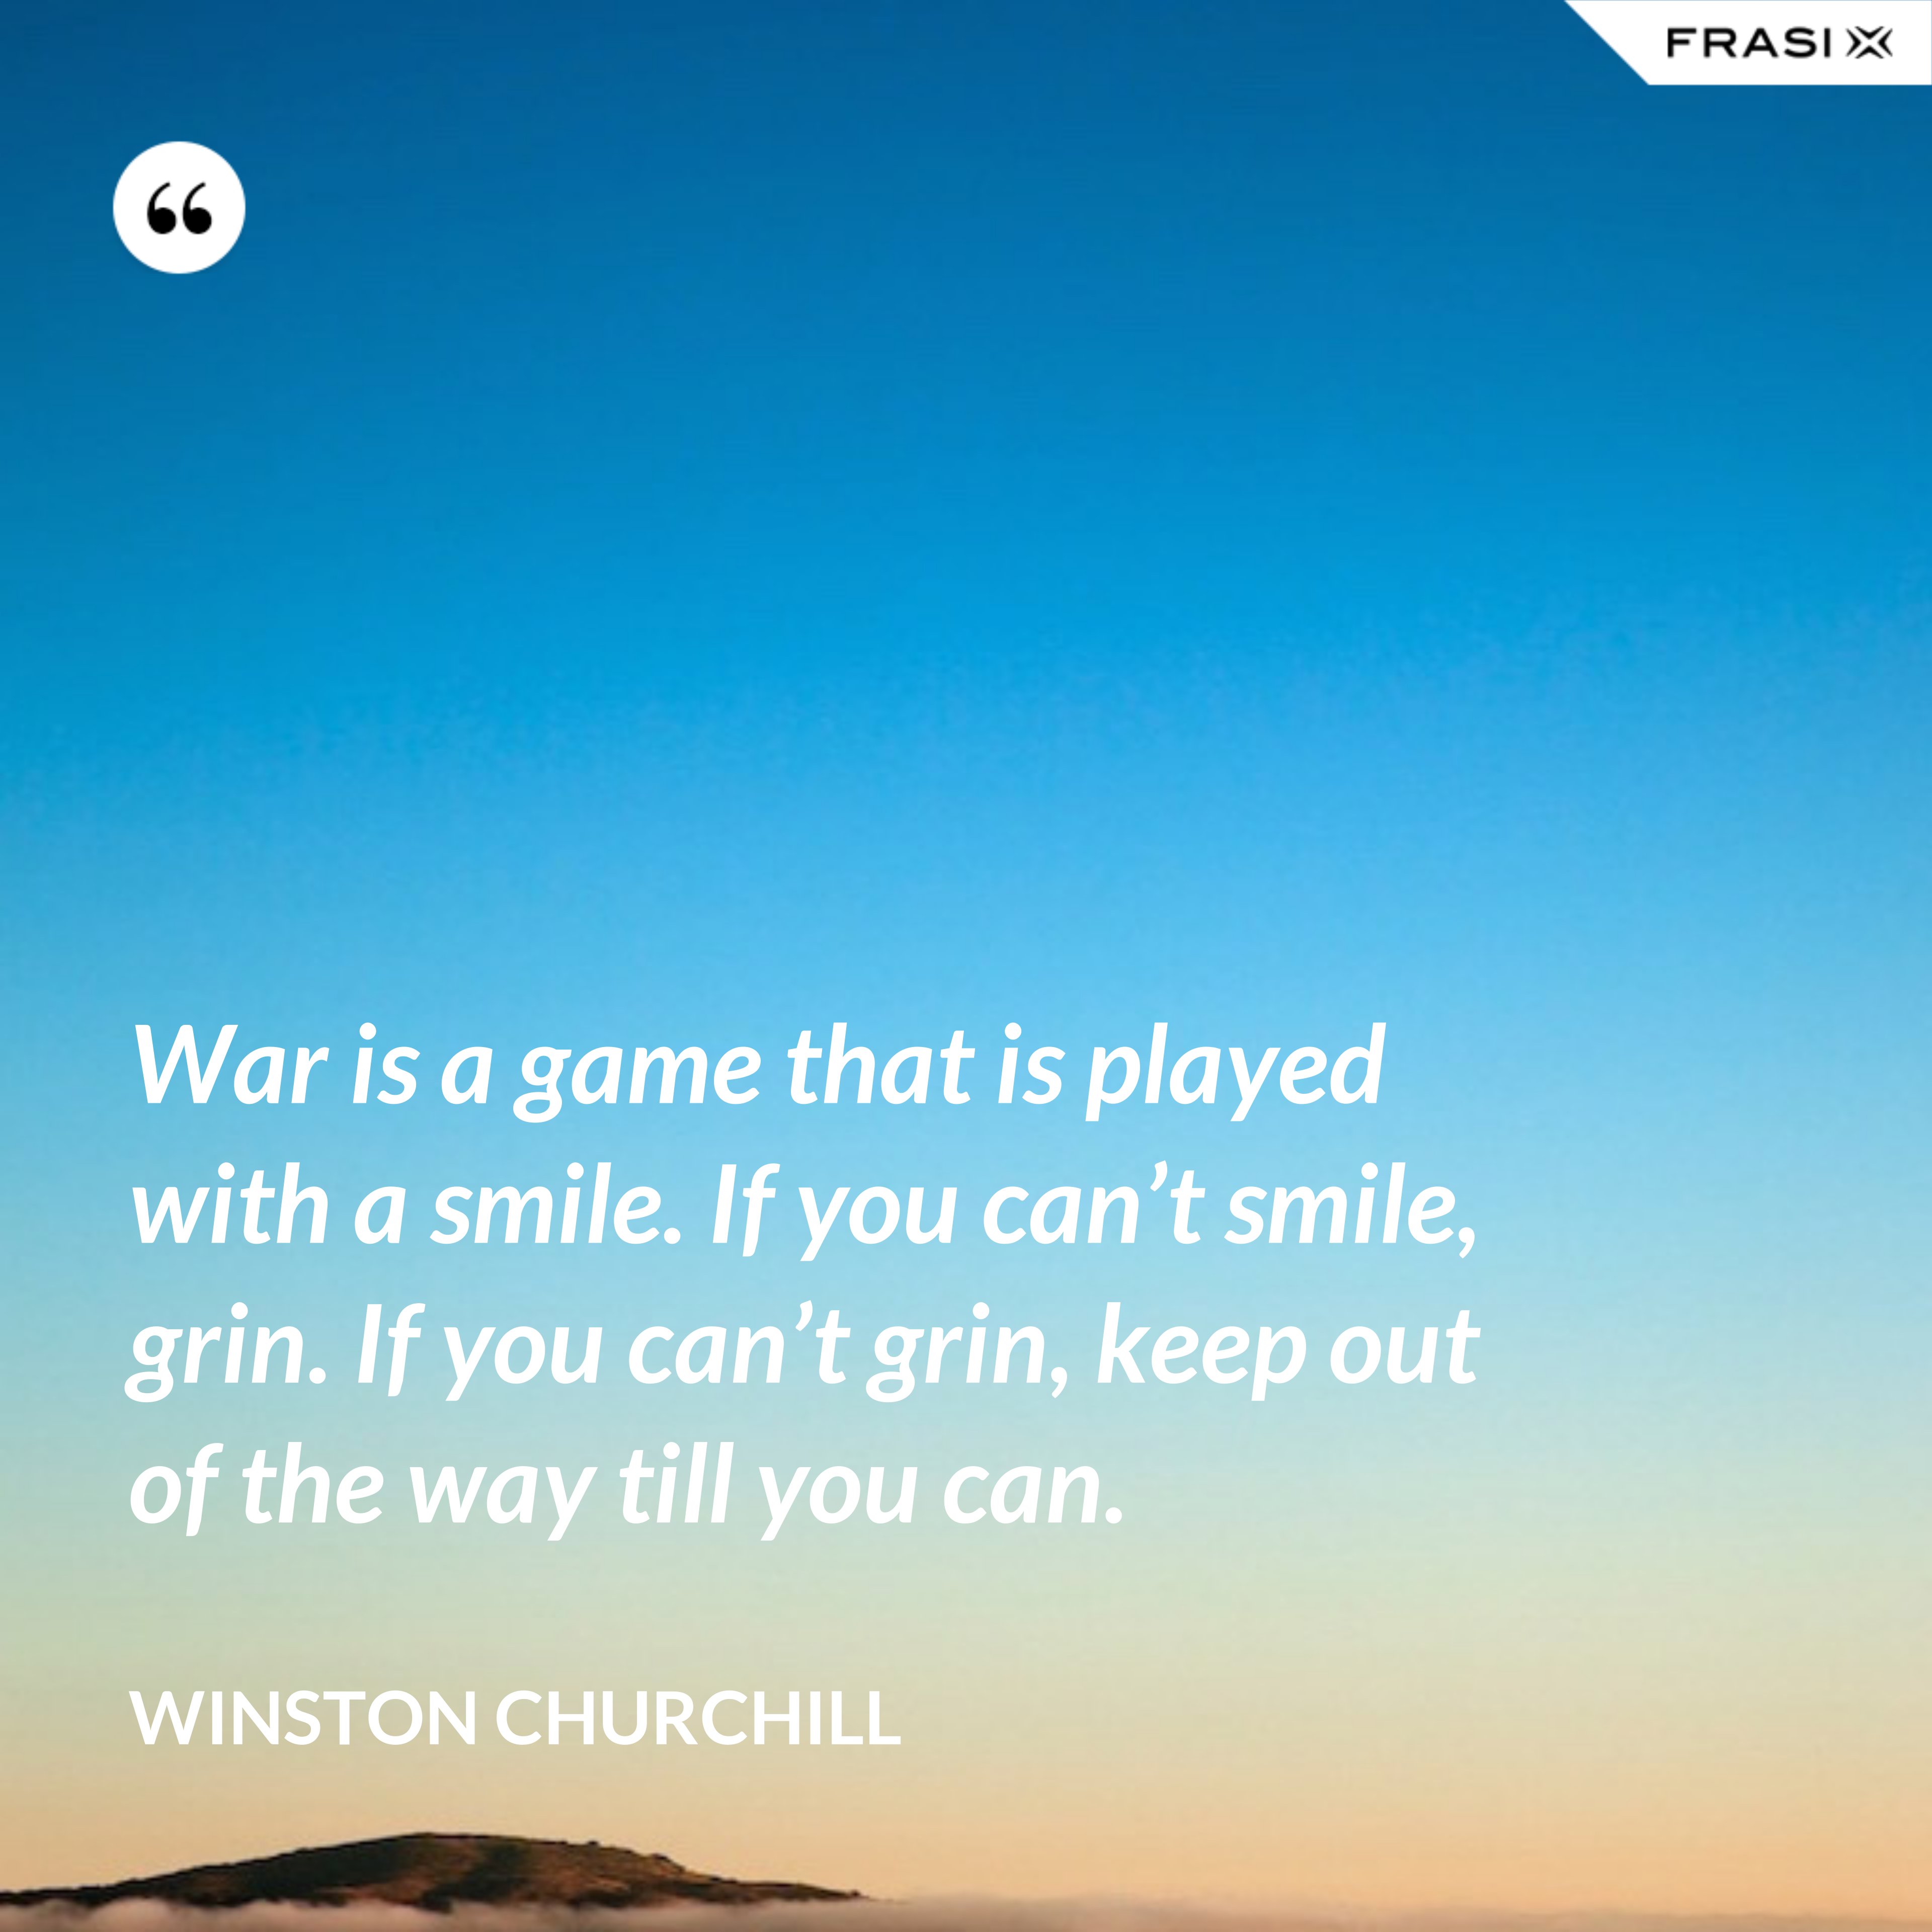 War is a game that is played with a smile. If you can’t smile, grin. If you can’t grin, keep out of the way till you can. - Winston Churchill